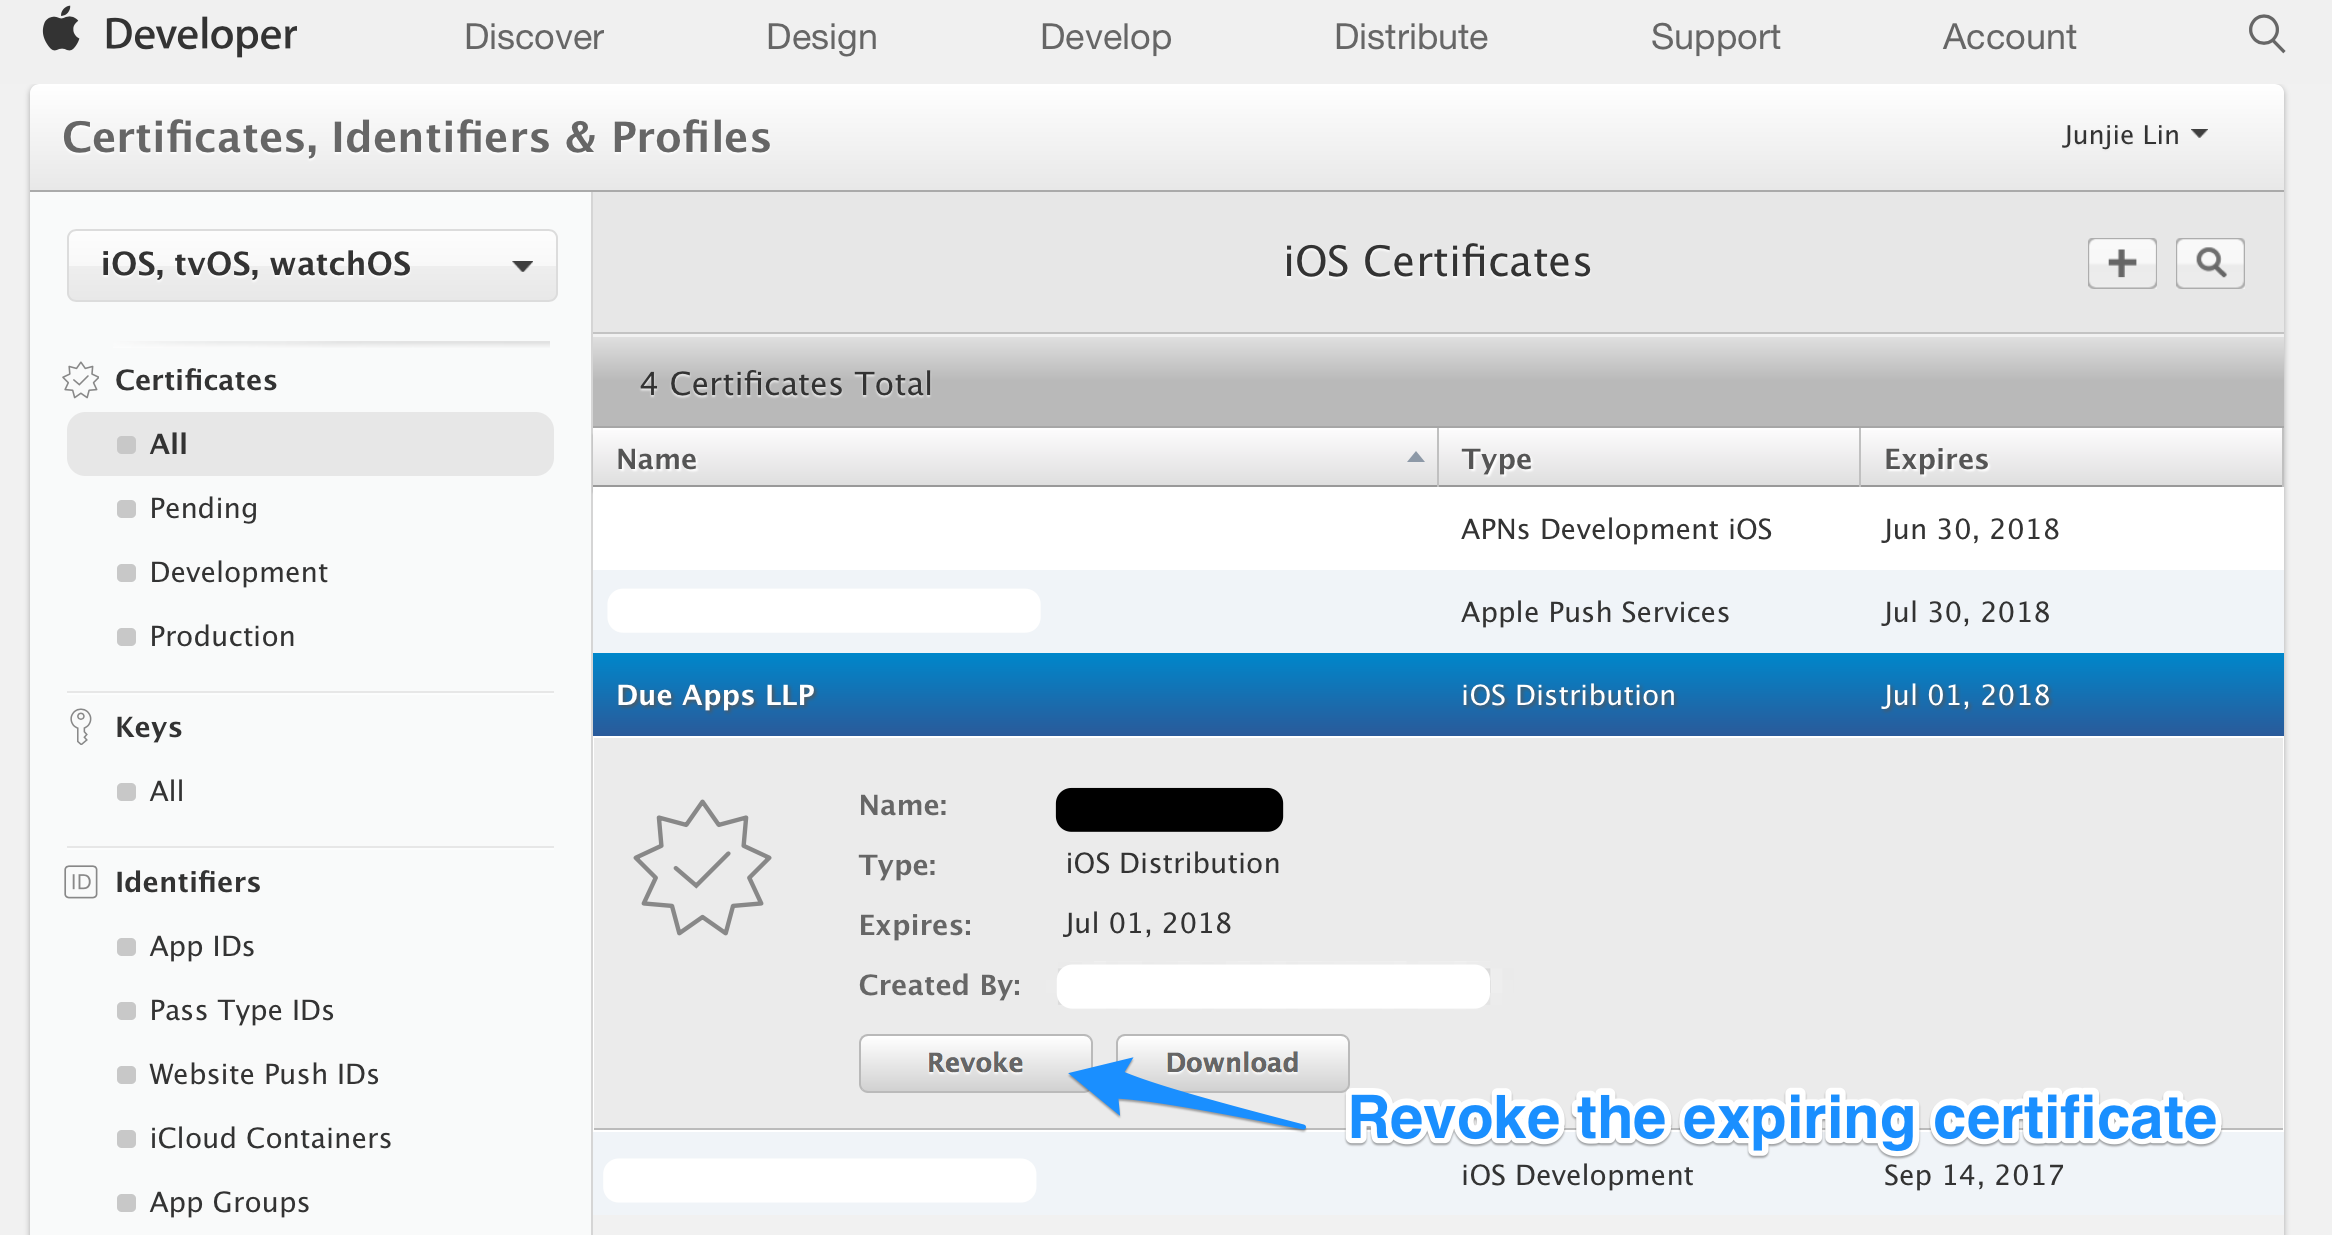 Select the expiring certificate and click the Revoke button